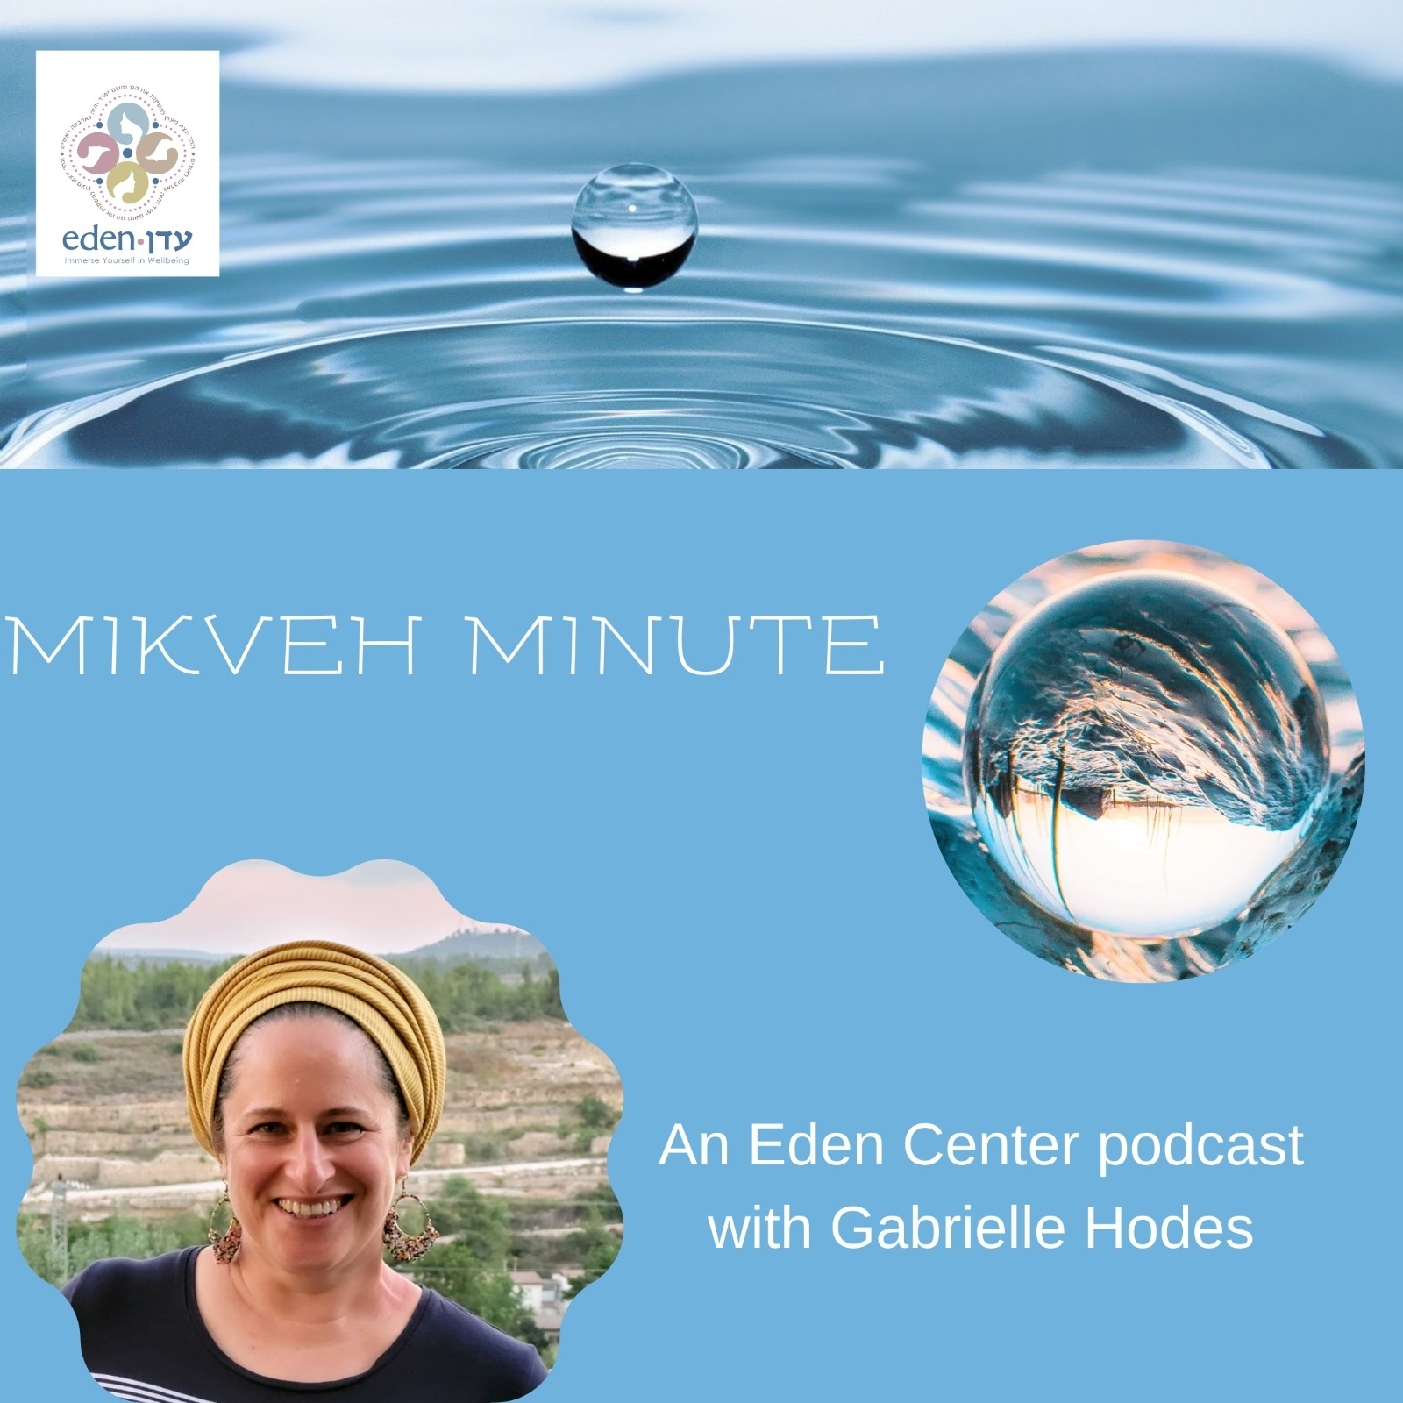 Trouble Connecting to the Mikveh